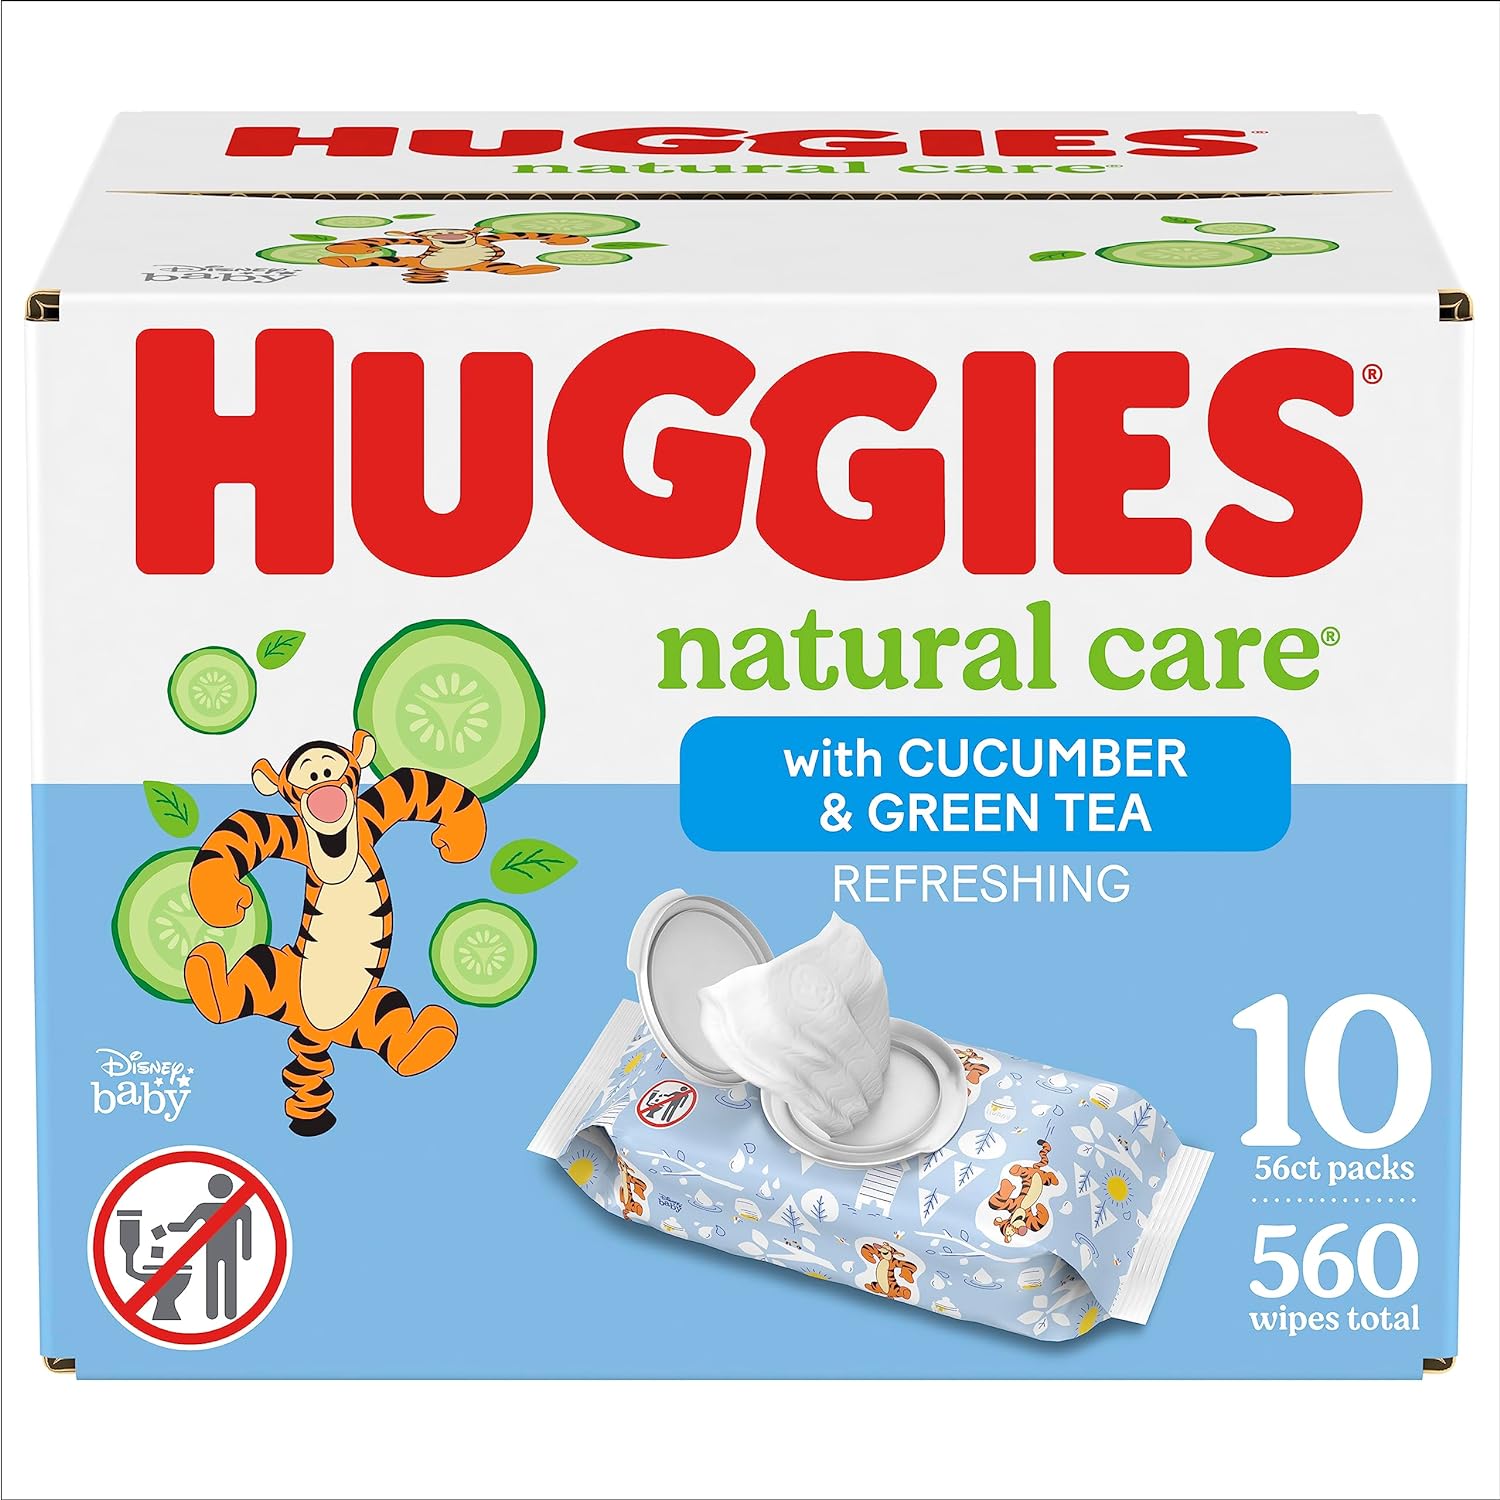 560-Count Huggies Natural Care Refreshing Baby Wipes (Cucumber/Green Tea) $12.48 w/ S&S + Free Shipping w/ Prime or on orders over $35